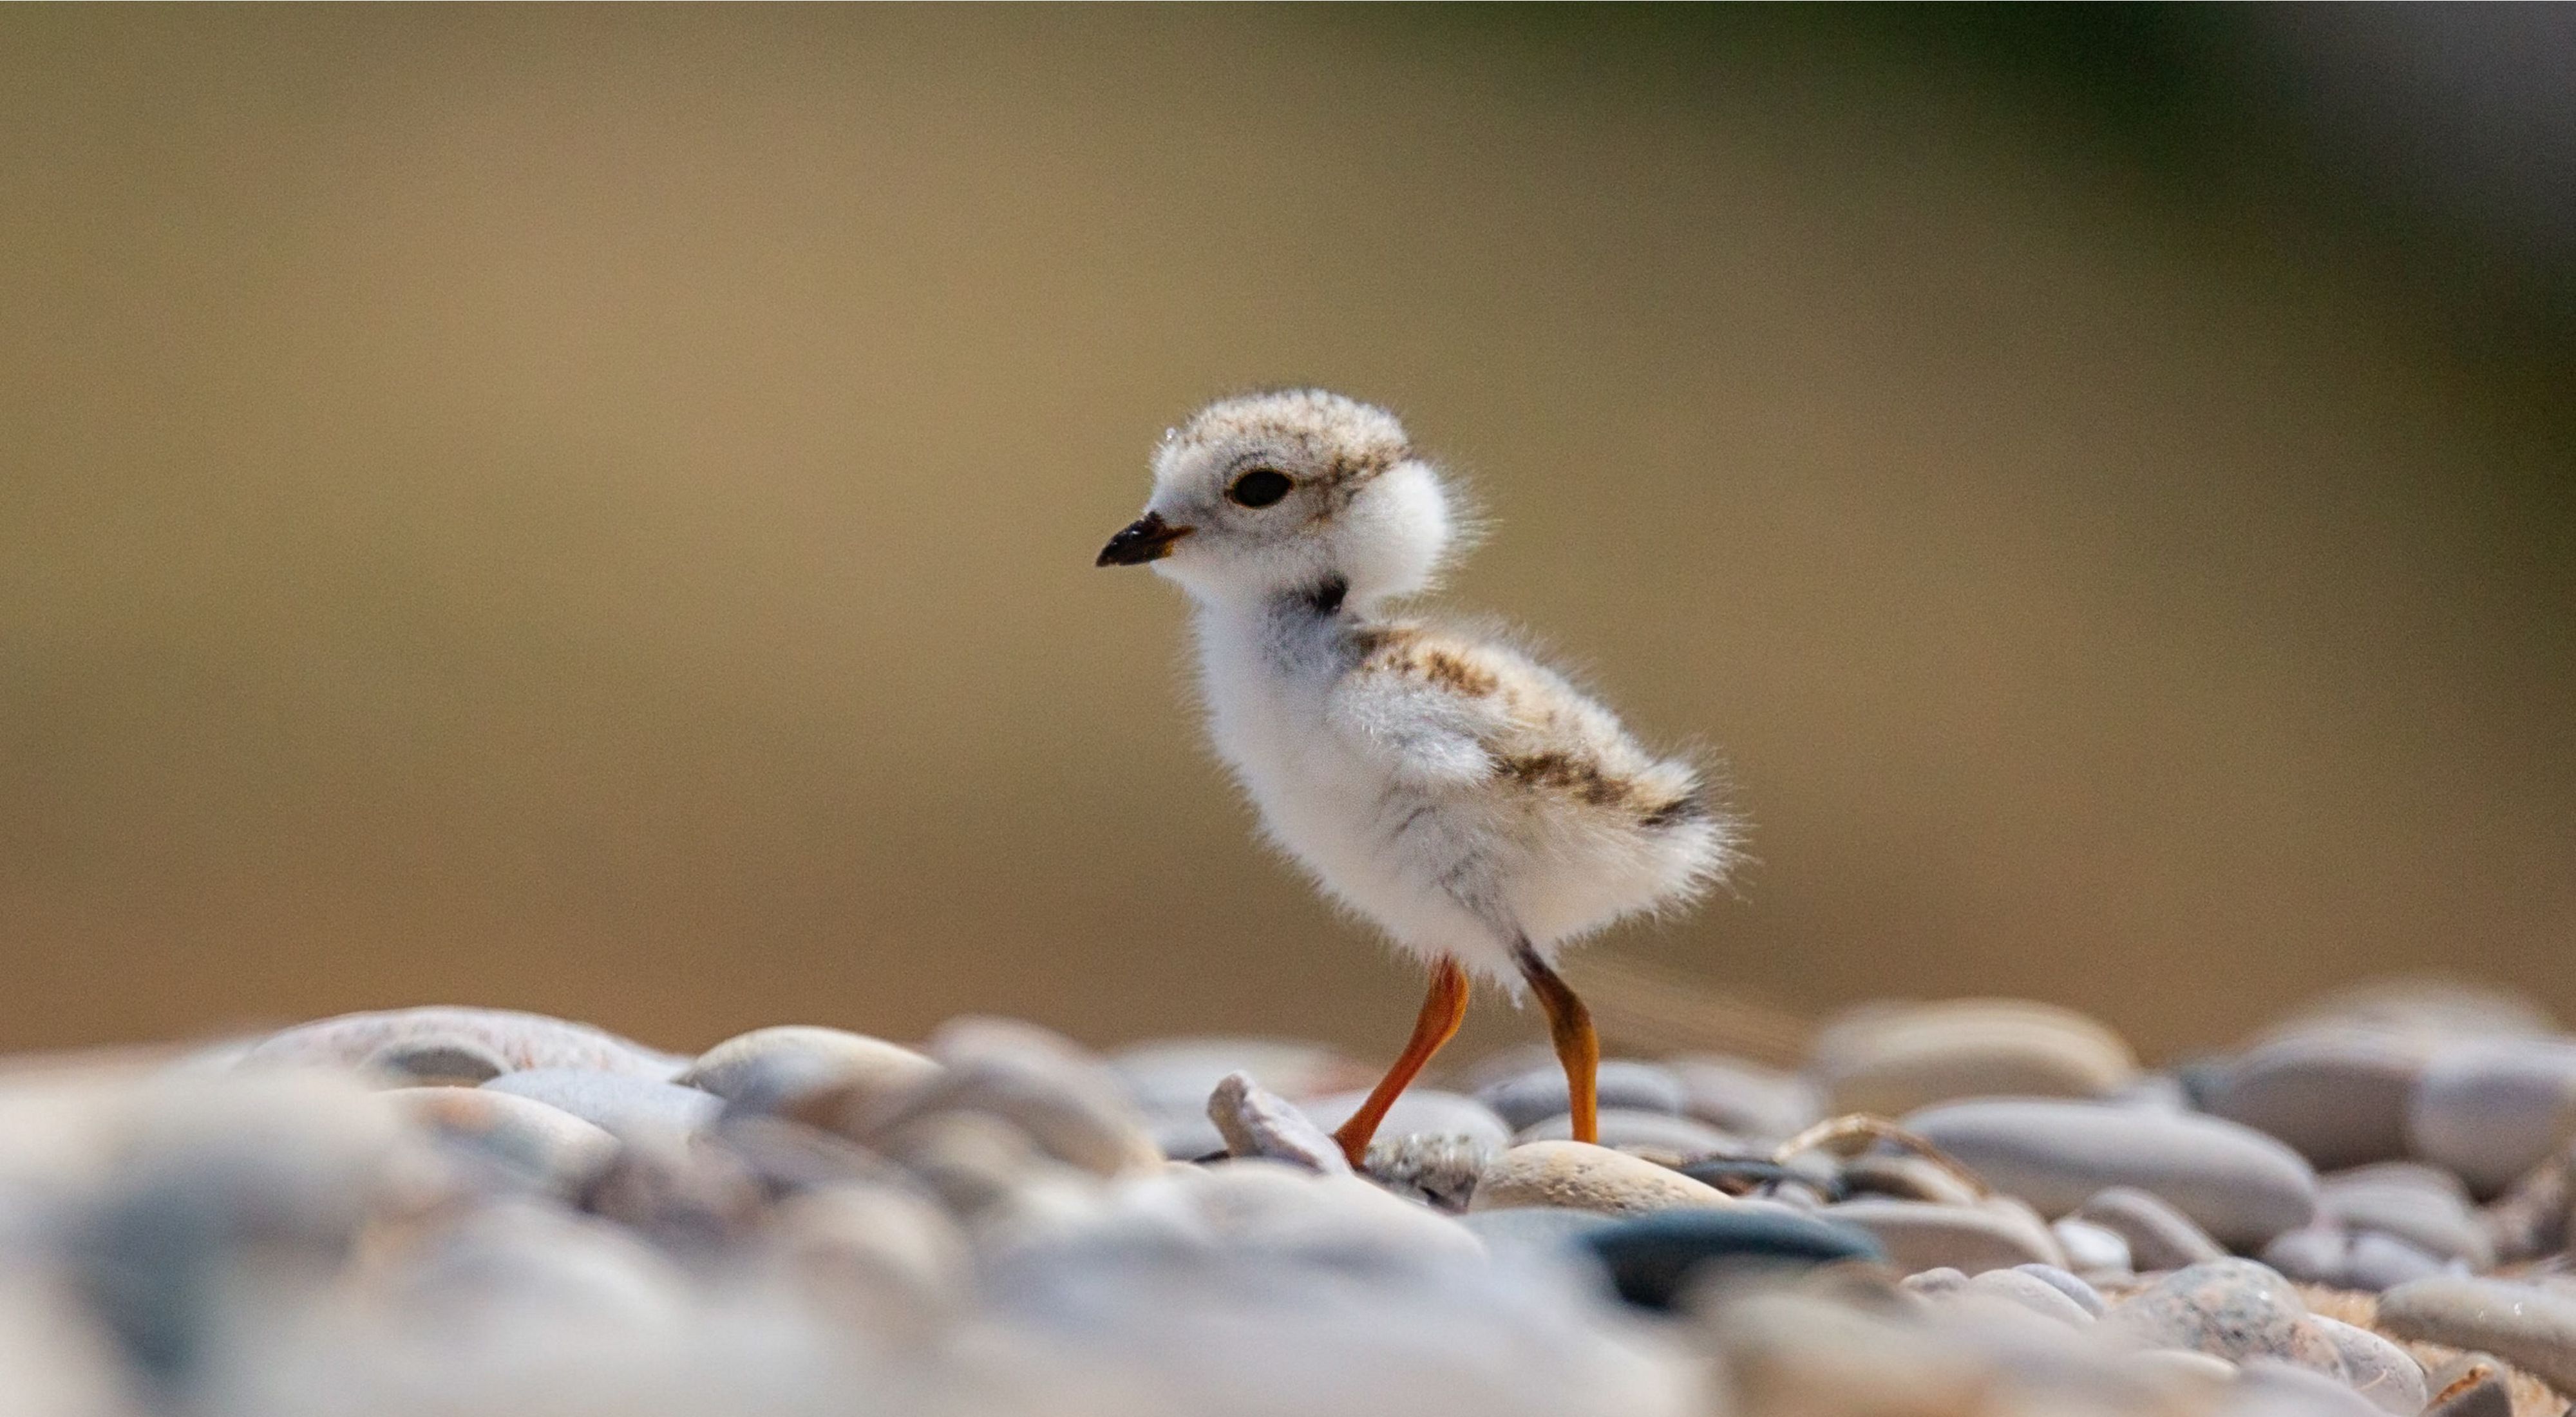 Piping plovers nested at the Zetterberg Preserve at Point Betsie for the first time in several decades. Piping plovers are federally endangered species and there were only 74 pairs of nesting piping plovers in the Great Lakes region in 2019. Partners that helped protect these birds include researchers from the University of Minnesota, US Fish and Wildlife Service, and Great Lakes Piping Plover Recovery Effort.